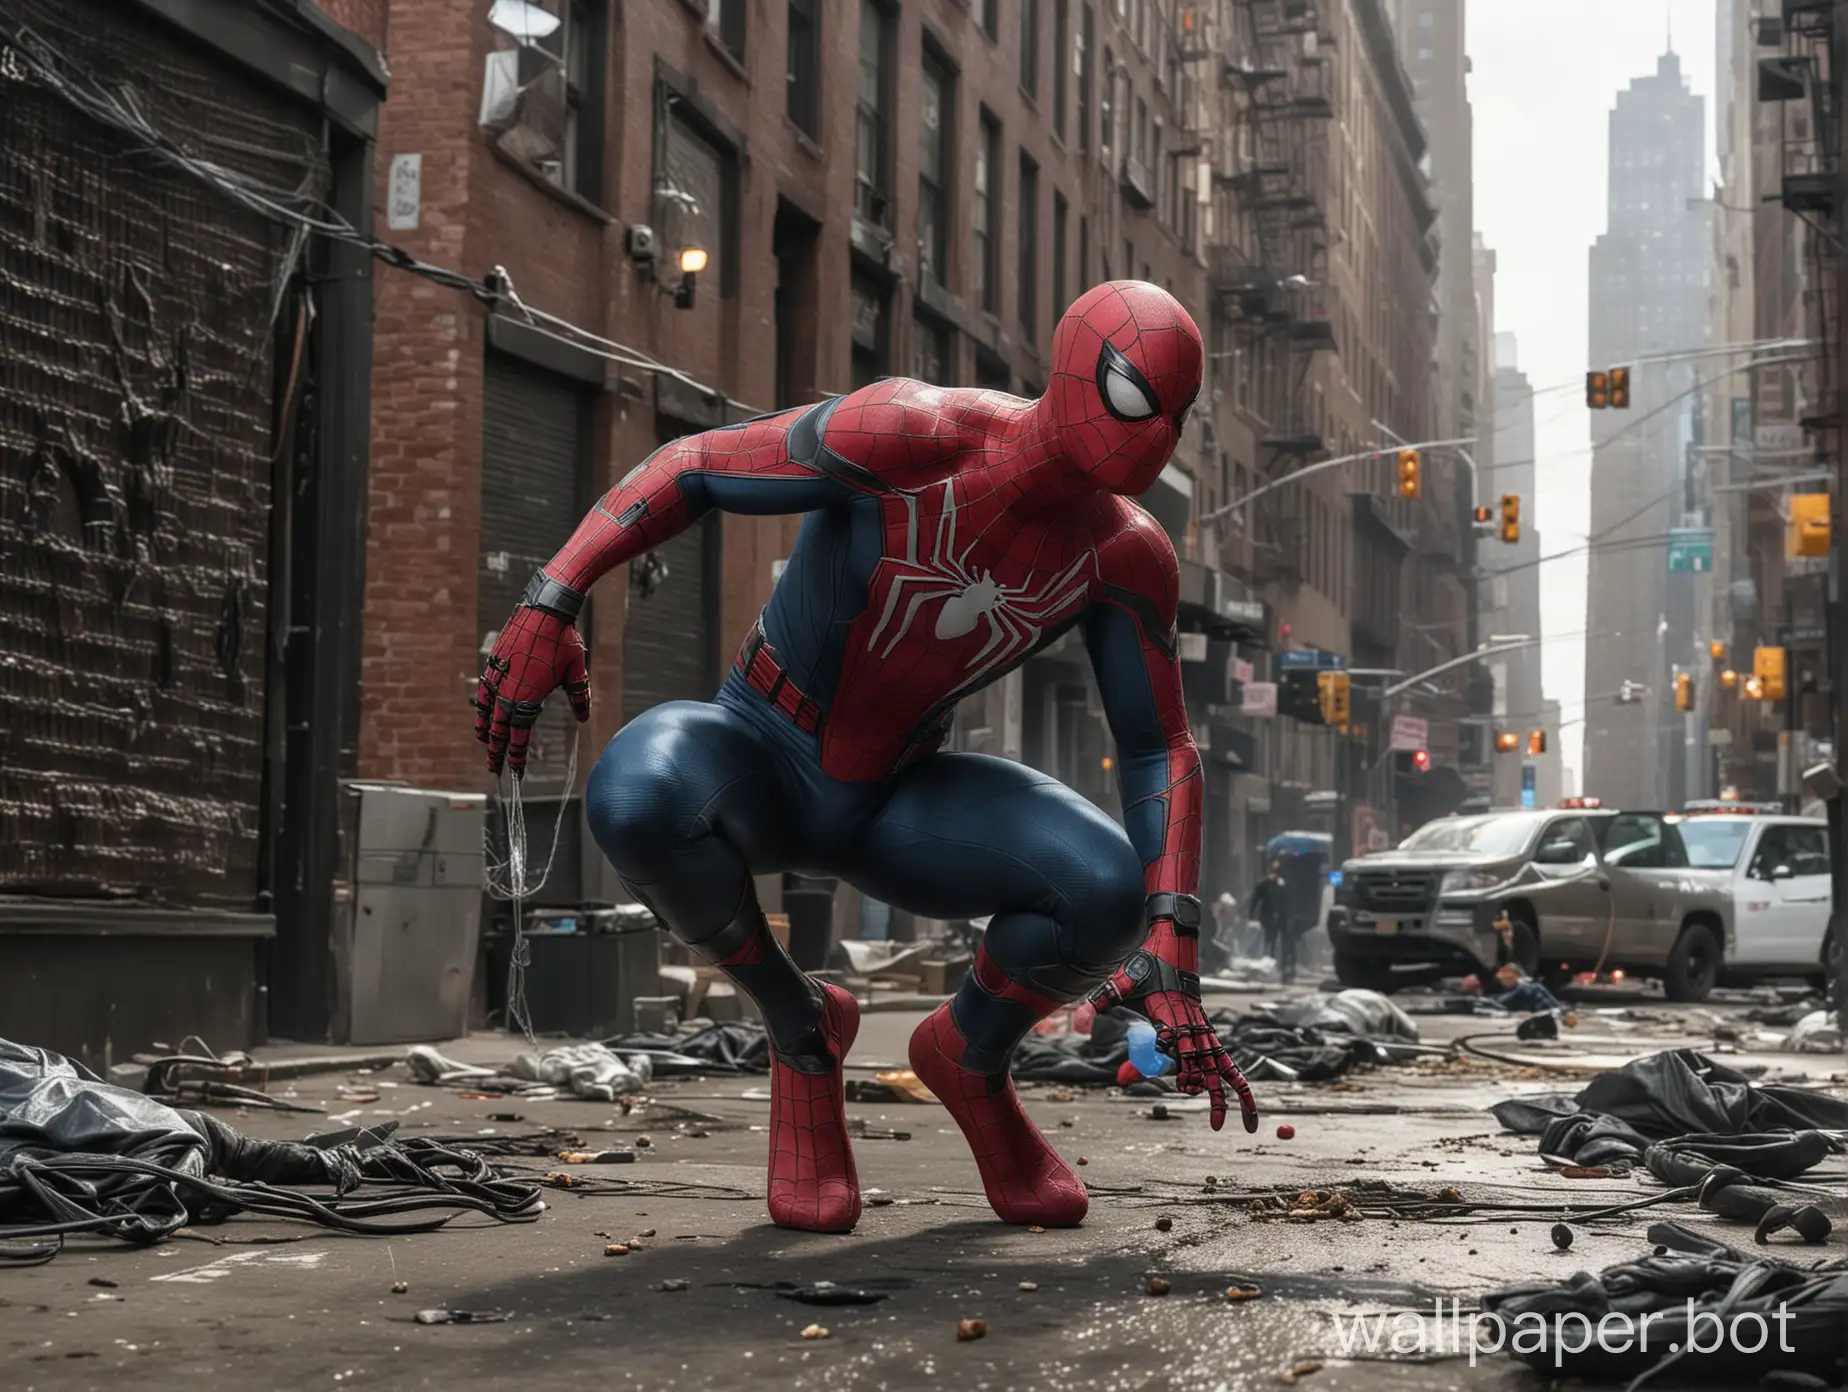 SpiderMan-Securing-Containment-Devices-in-New-York-City-Amidst-Infection-Crisis